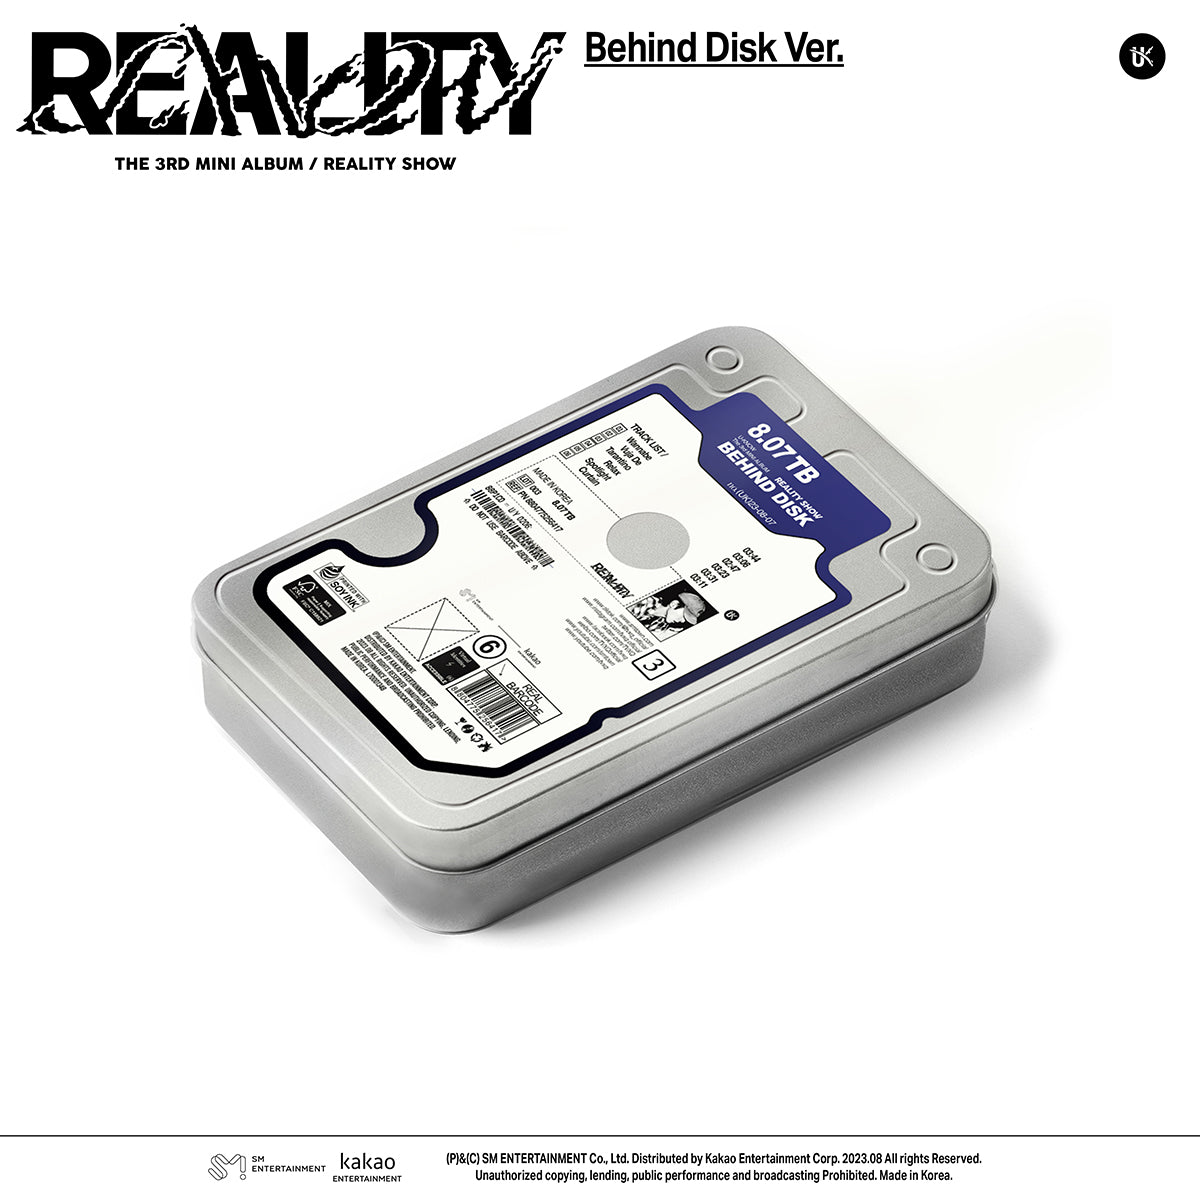 U-KNOW - Reality Show (Behind Disk Ver.) (Limited Edition)